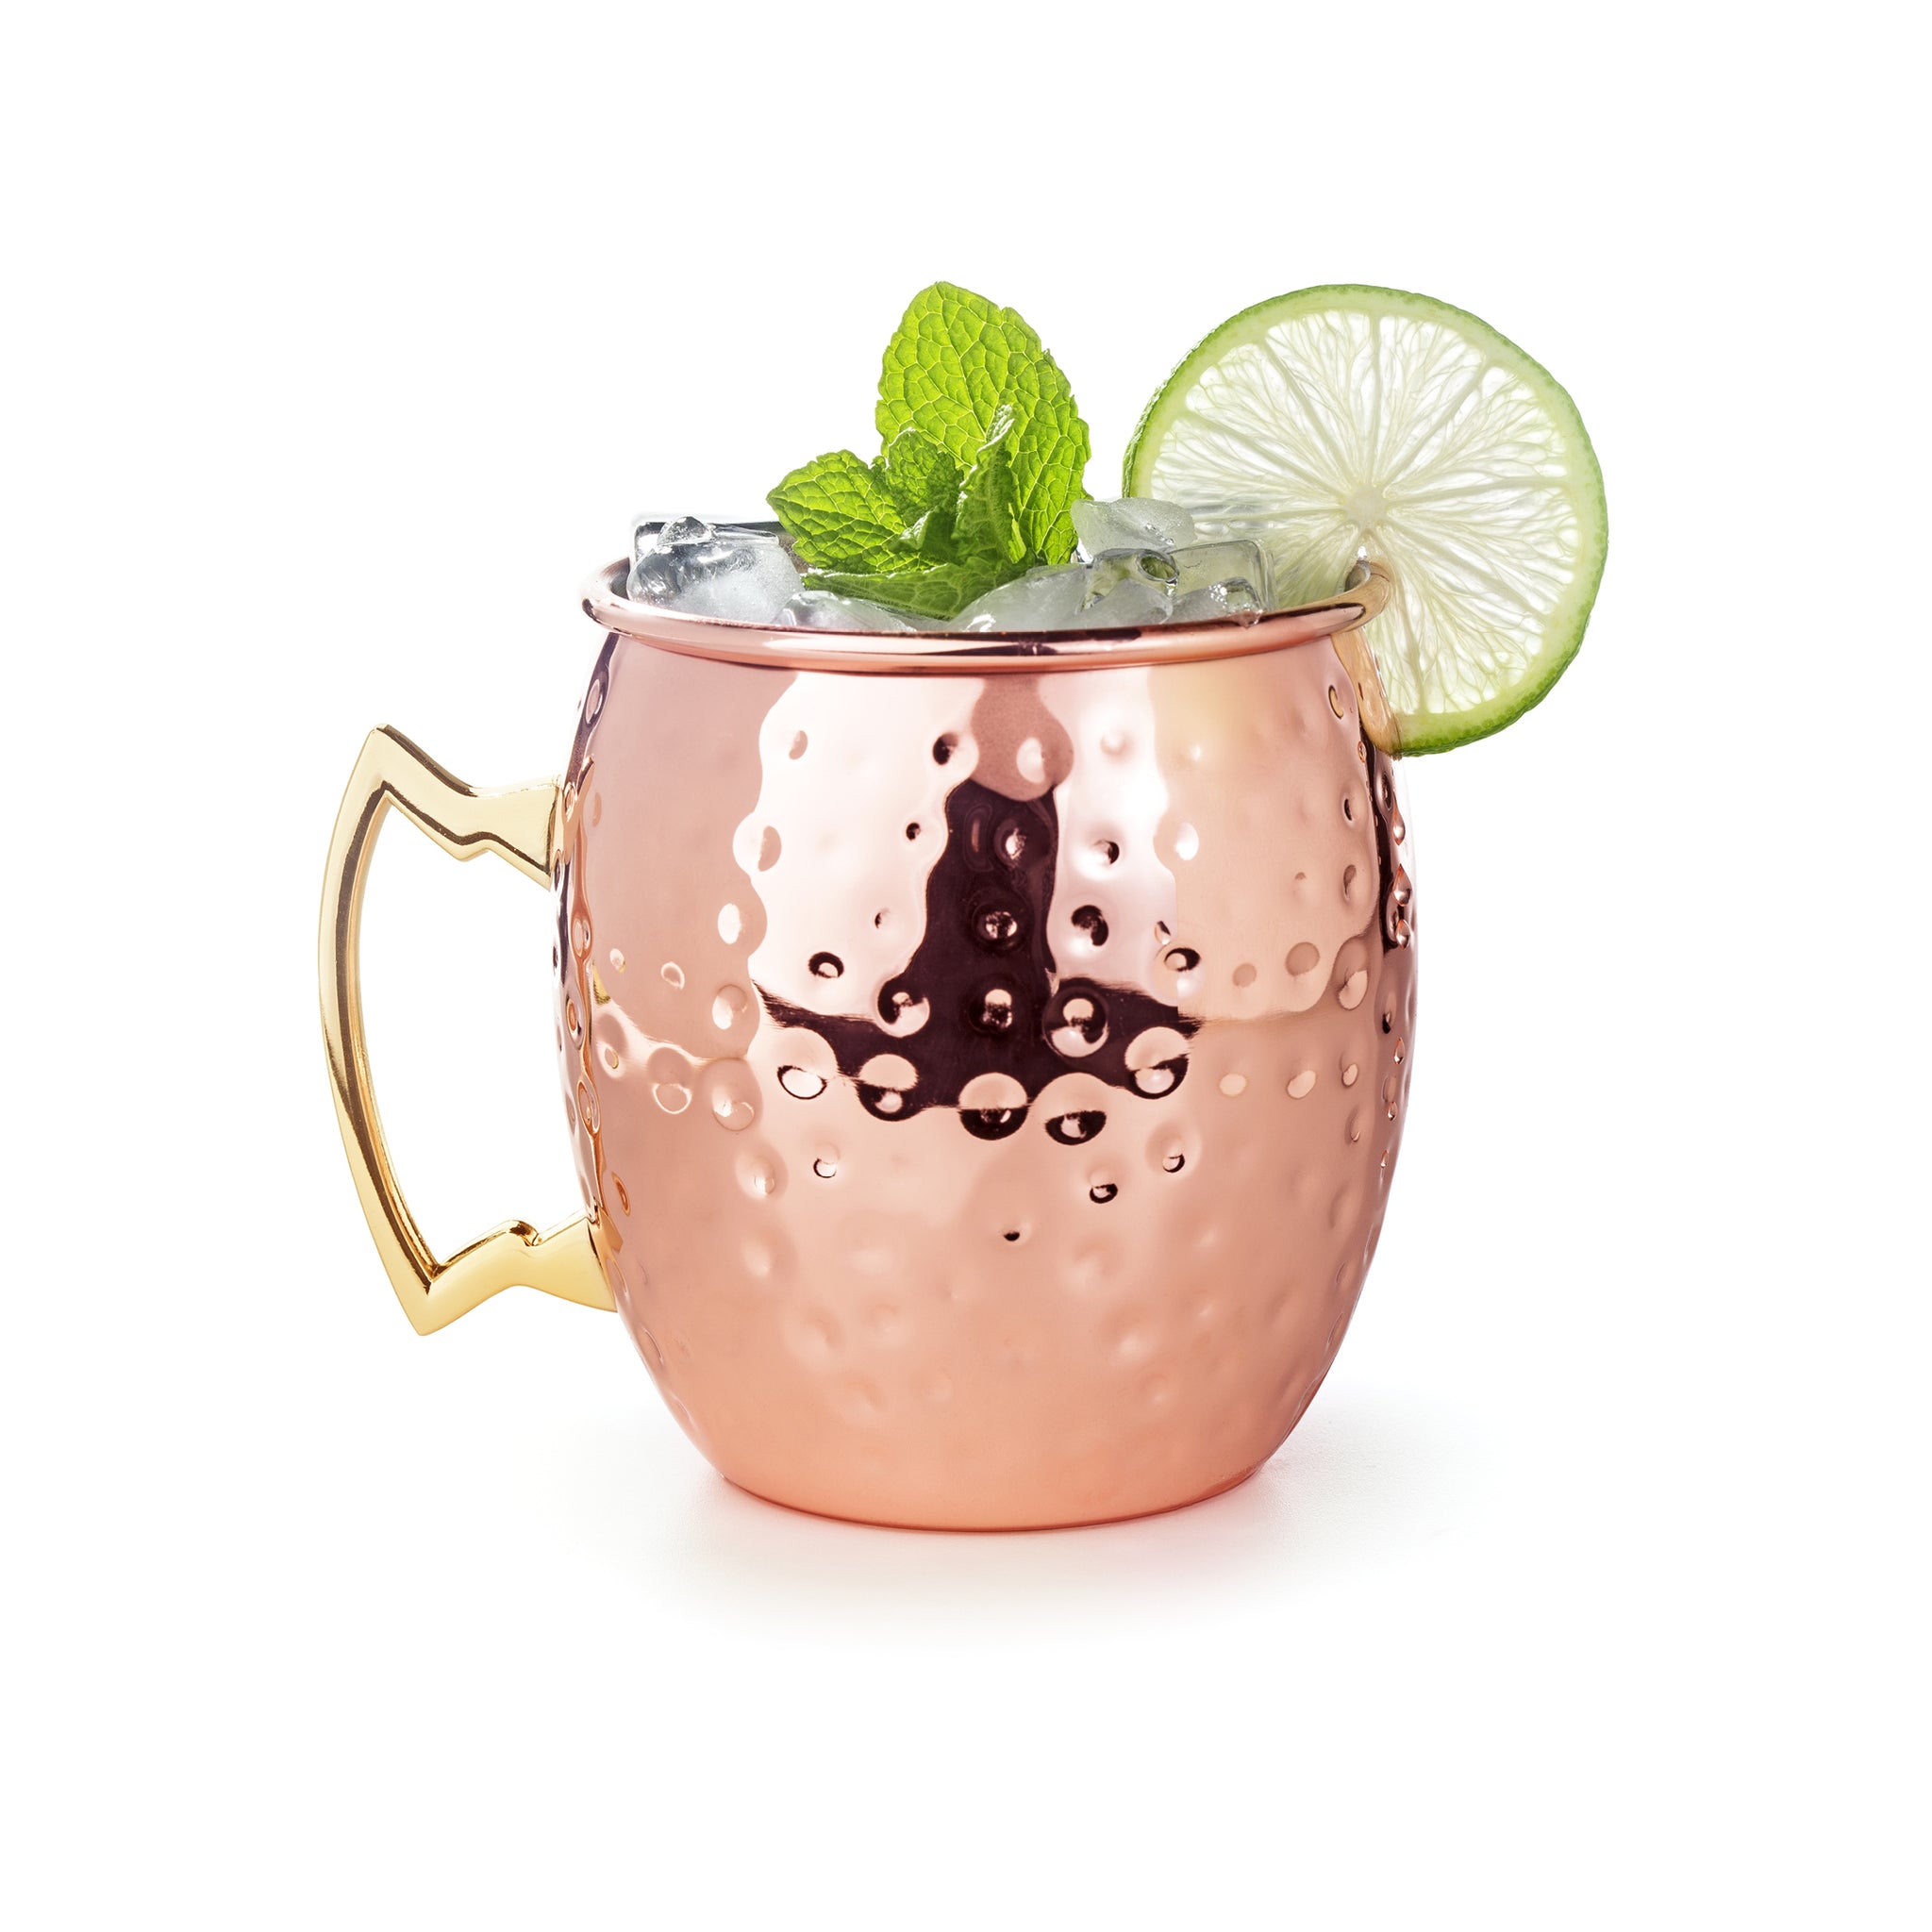 Moscow Mule Cobre – Pineapple Tools